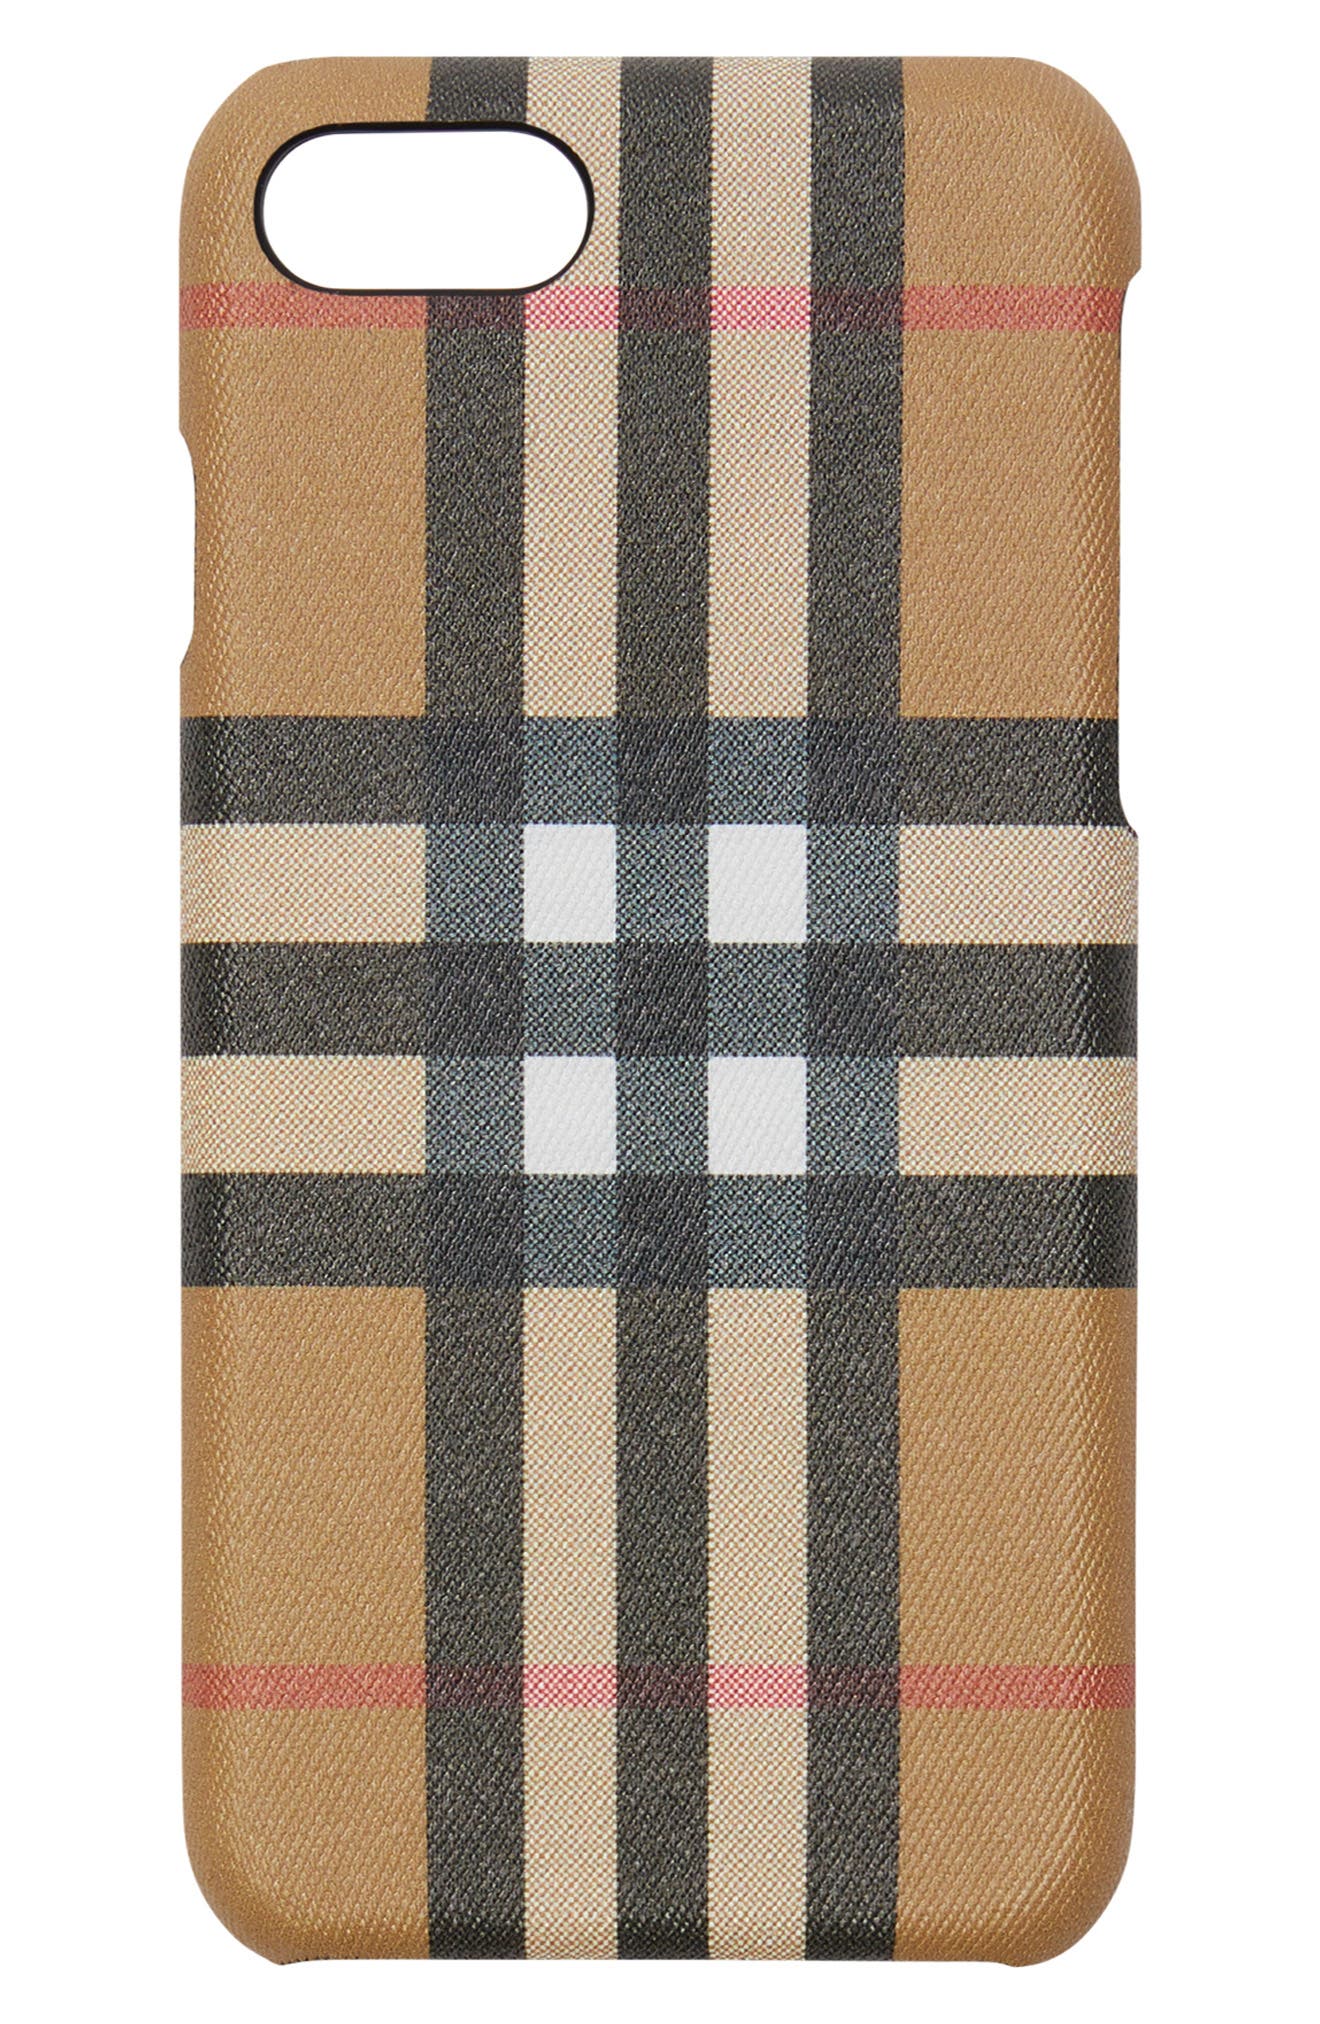 Burberry Vintage Check iPhone 8 Case 